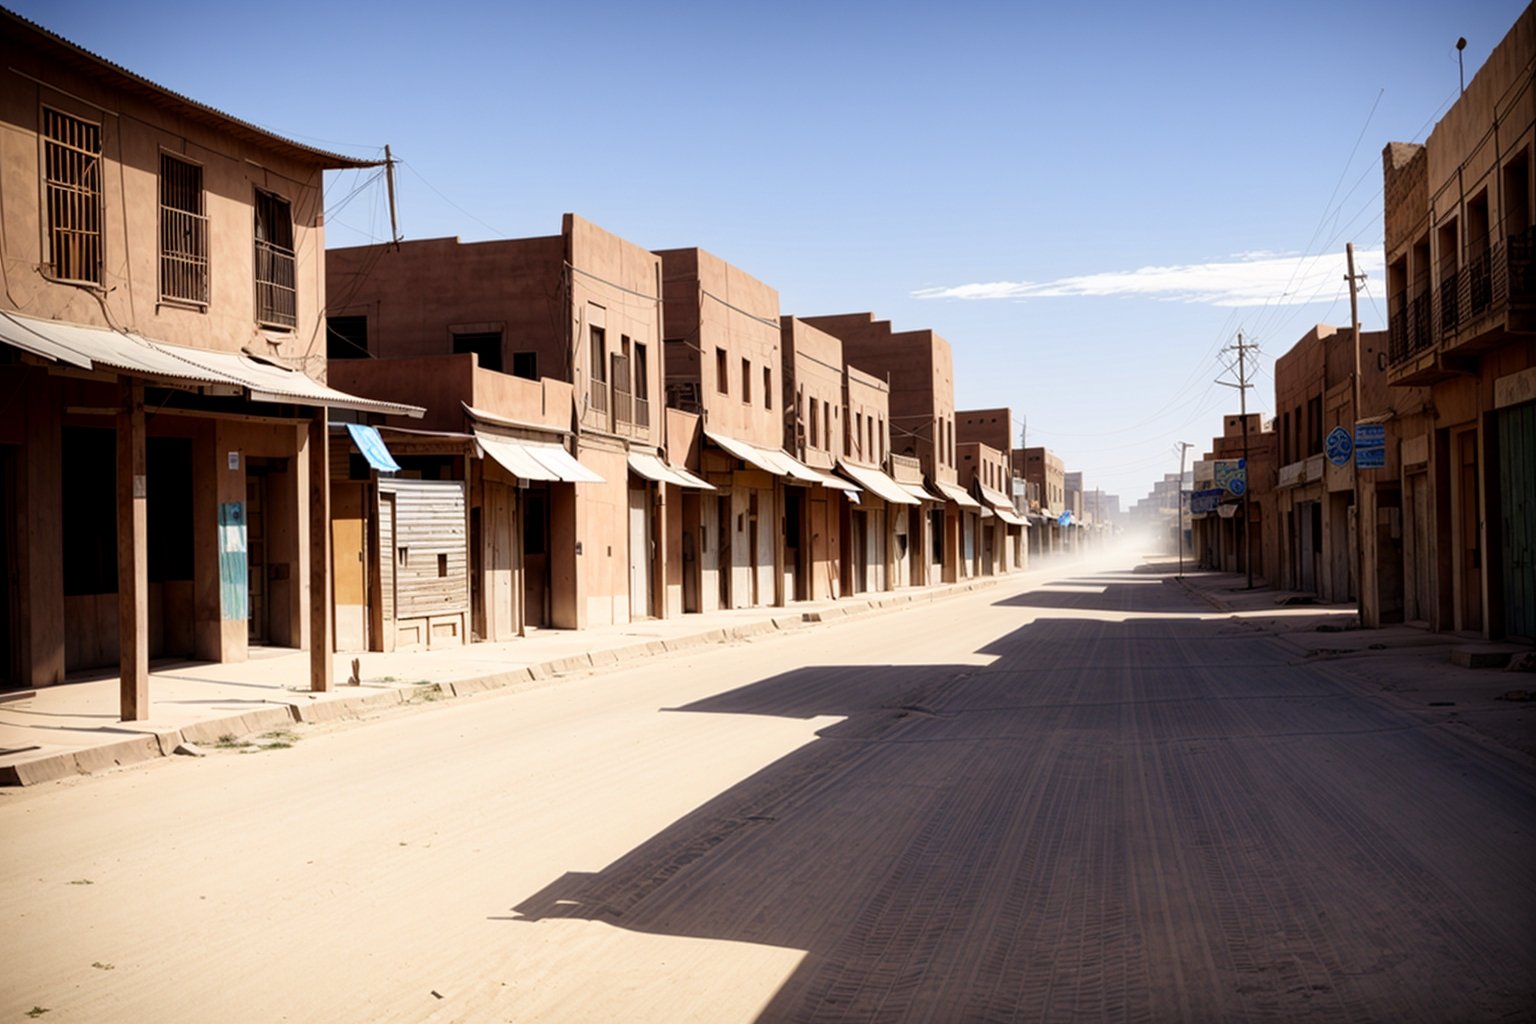 deserted street of a city in the time of the far west, sunny, dusty ground